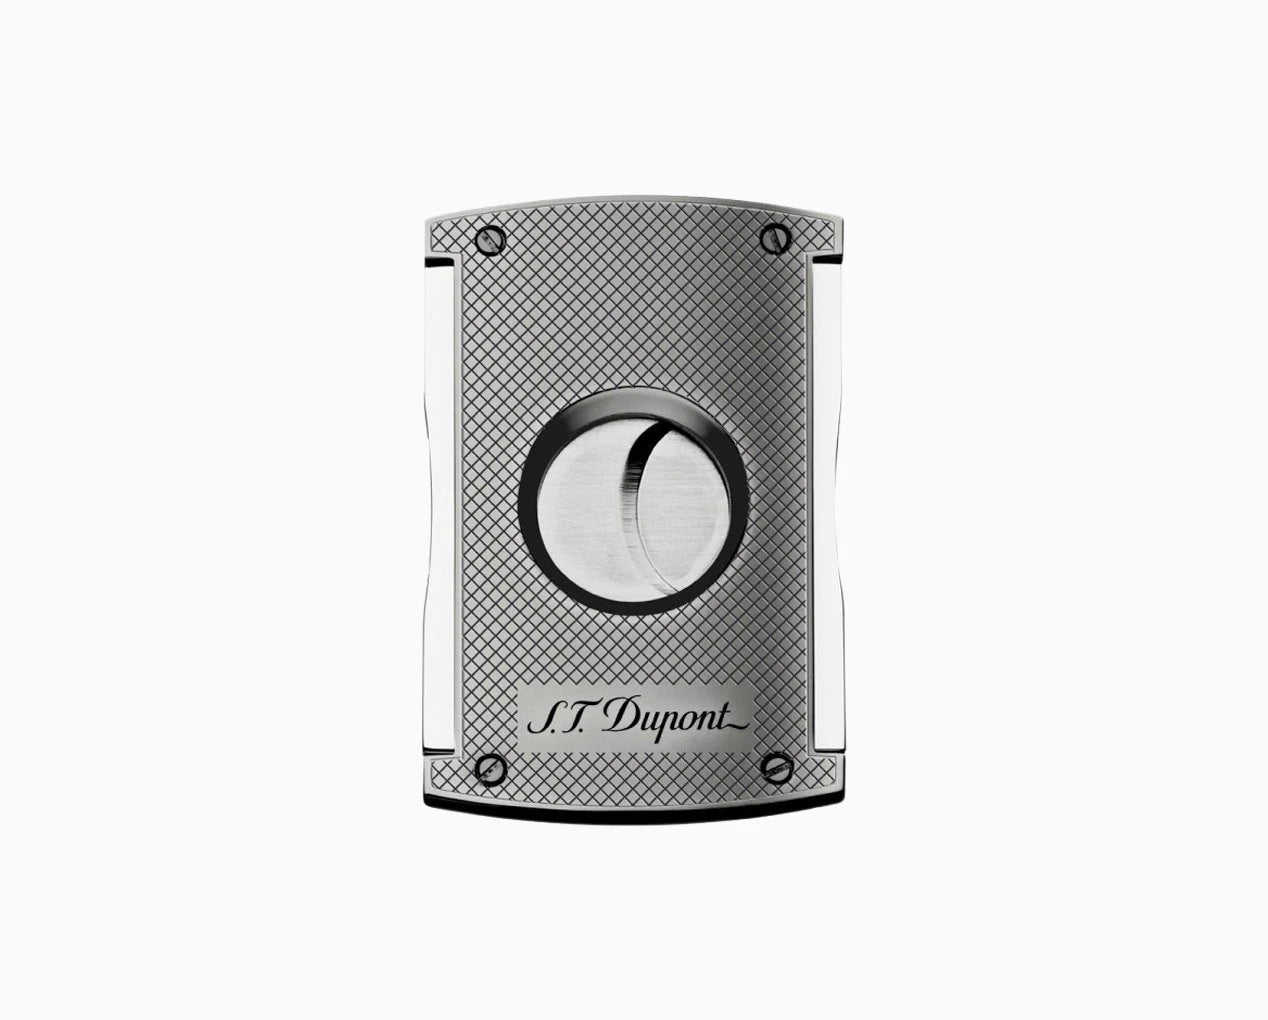 S.T. Dupont Maxijet Chequered Chrome Cigar Cutter